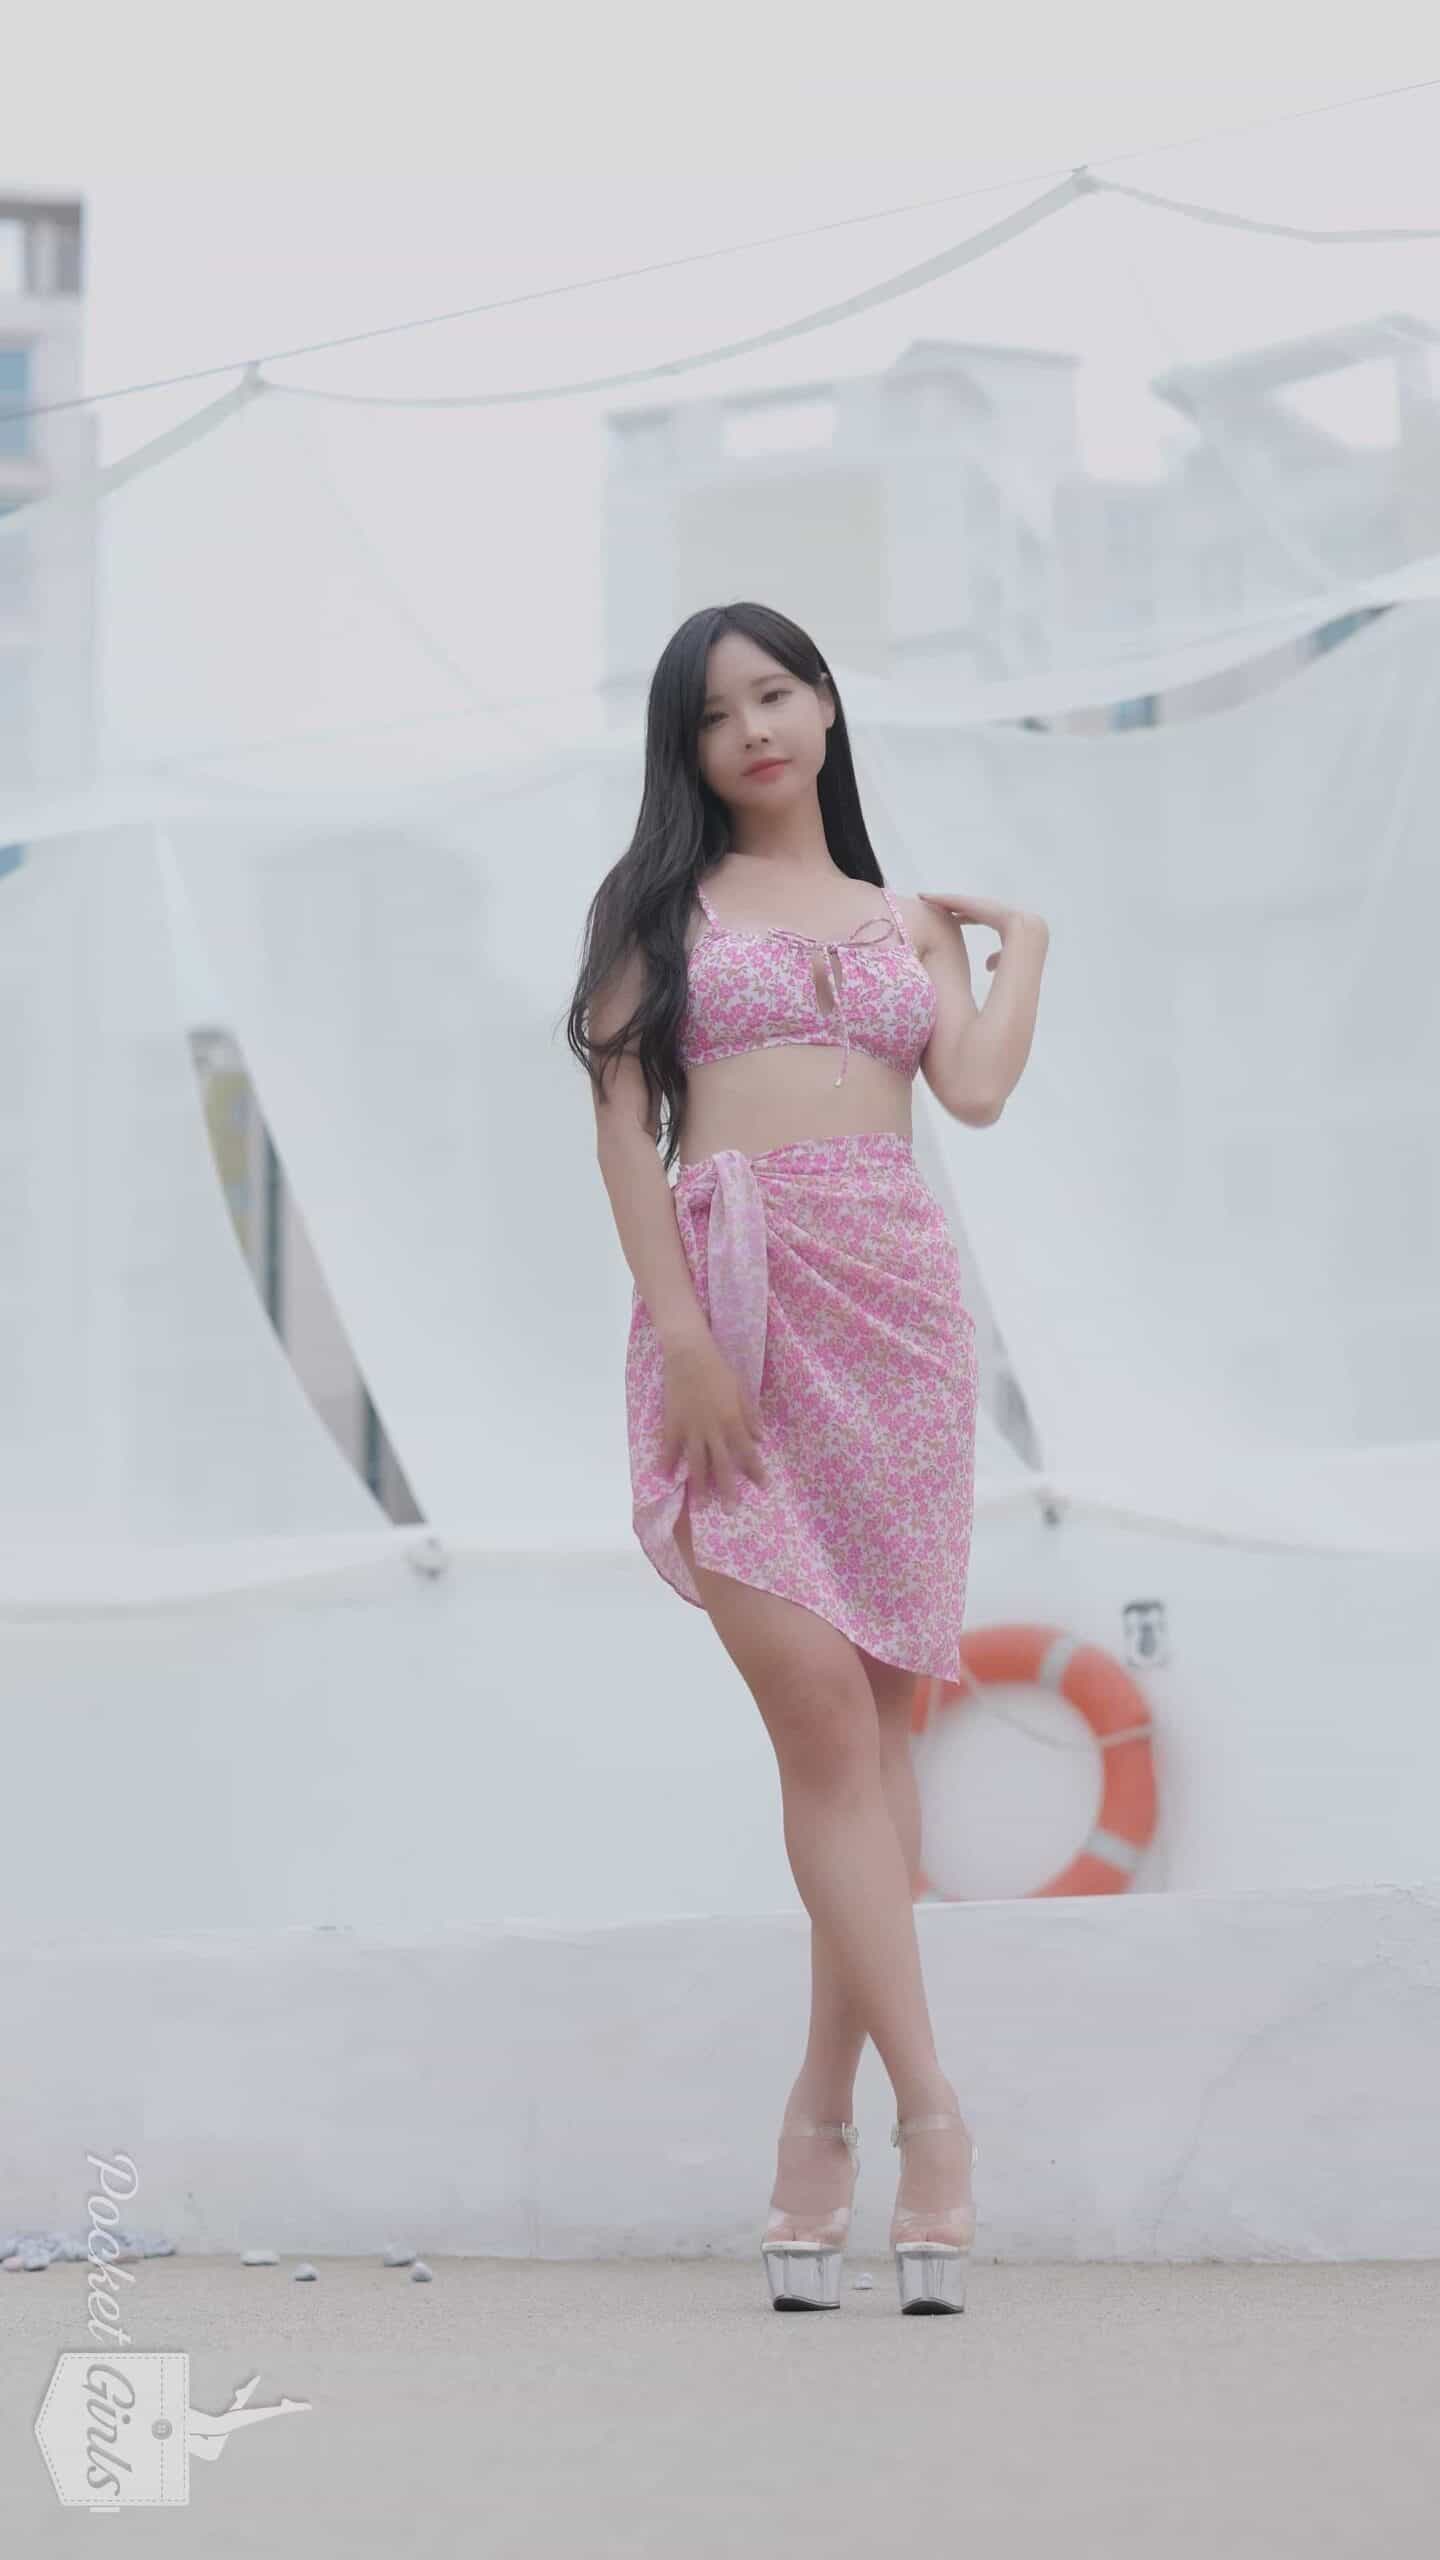 At a Rooftop Pool, Habin, Pocket Girls, 하빈, 포켓걸스, My Skin’s on Fire – #00209插图1